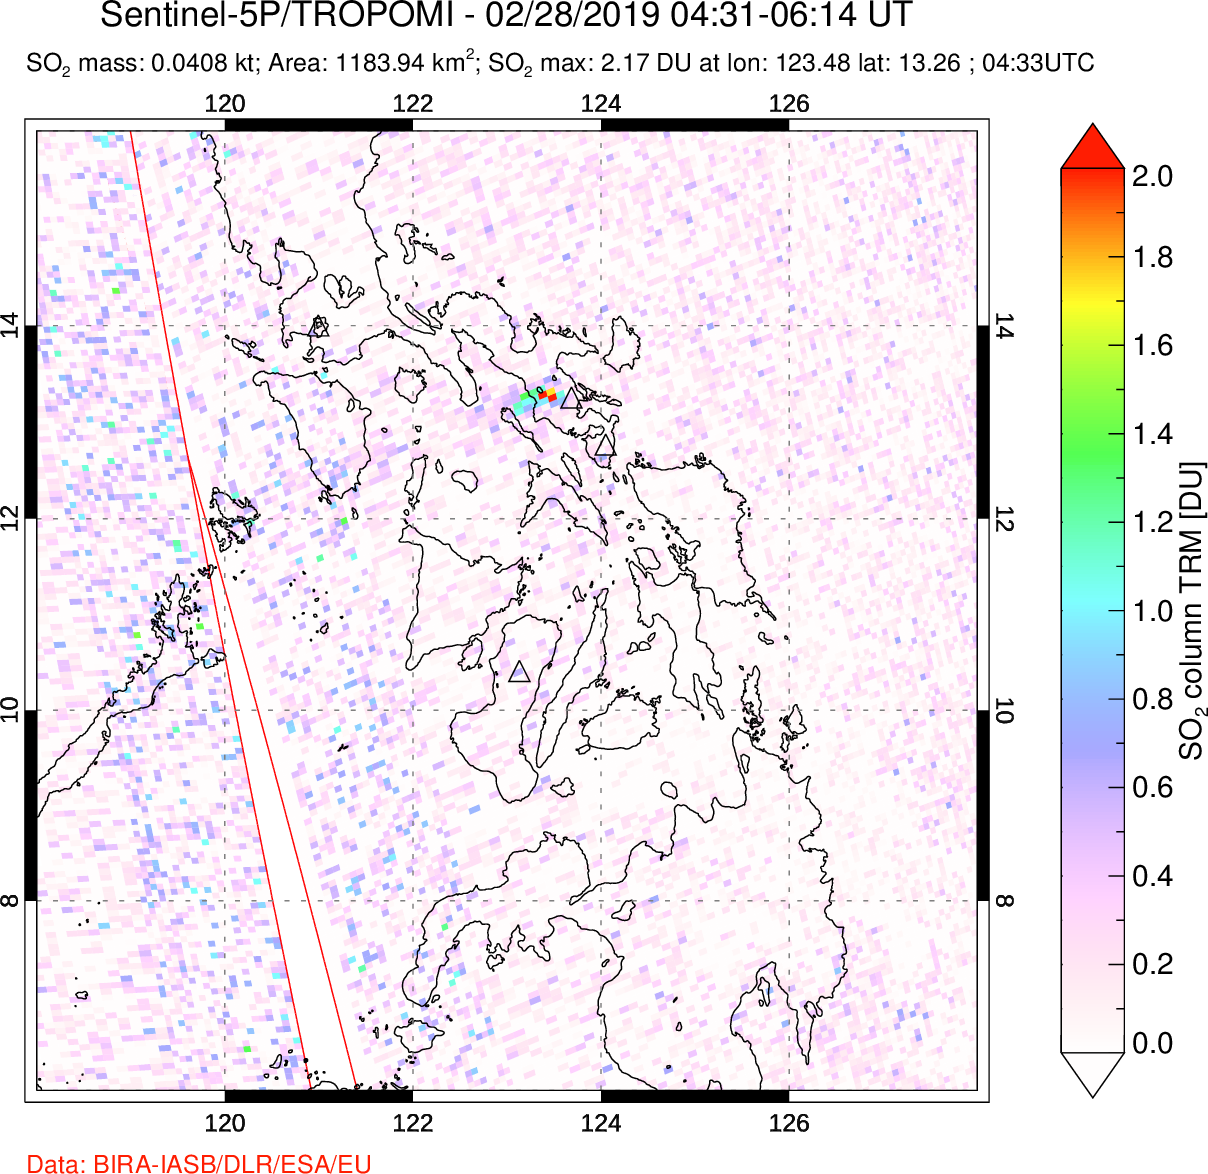 A sulfur dioxide image over Philippines on Feb 28, 2019.